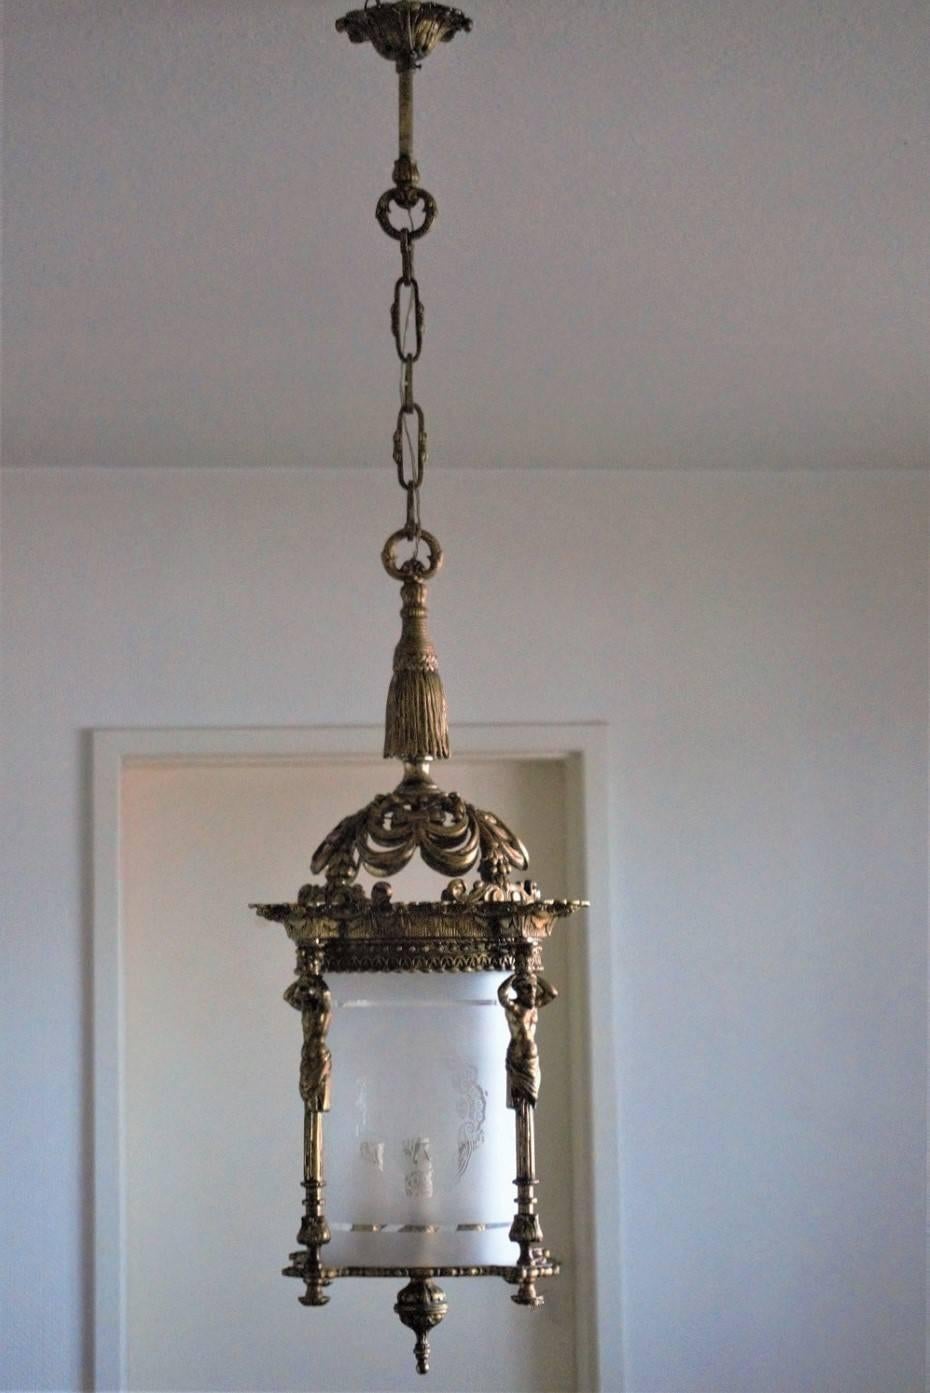 Early 20th Century French large Empire style fire-gilded solid bronze and etched glass cylinder four-light lantern or chandelier. Bronze richly ornamented and with four figurine columns

Four lamp sockets (chandelier candle covers)

Measures: Total